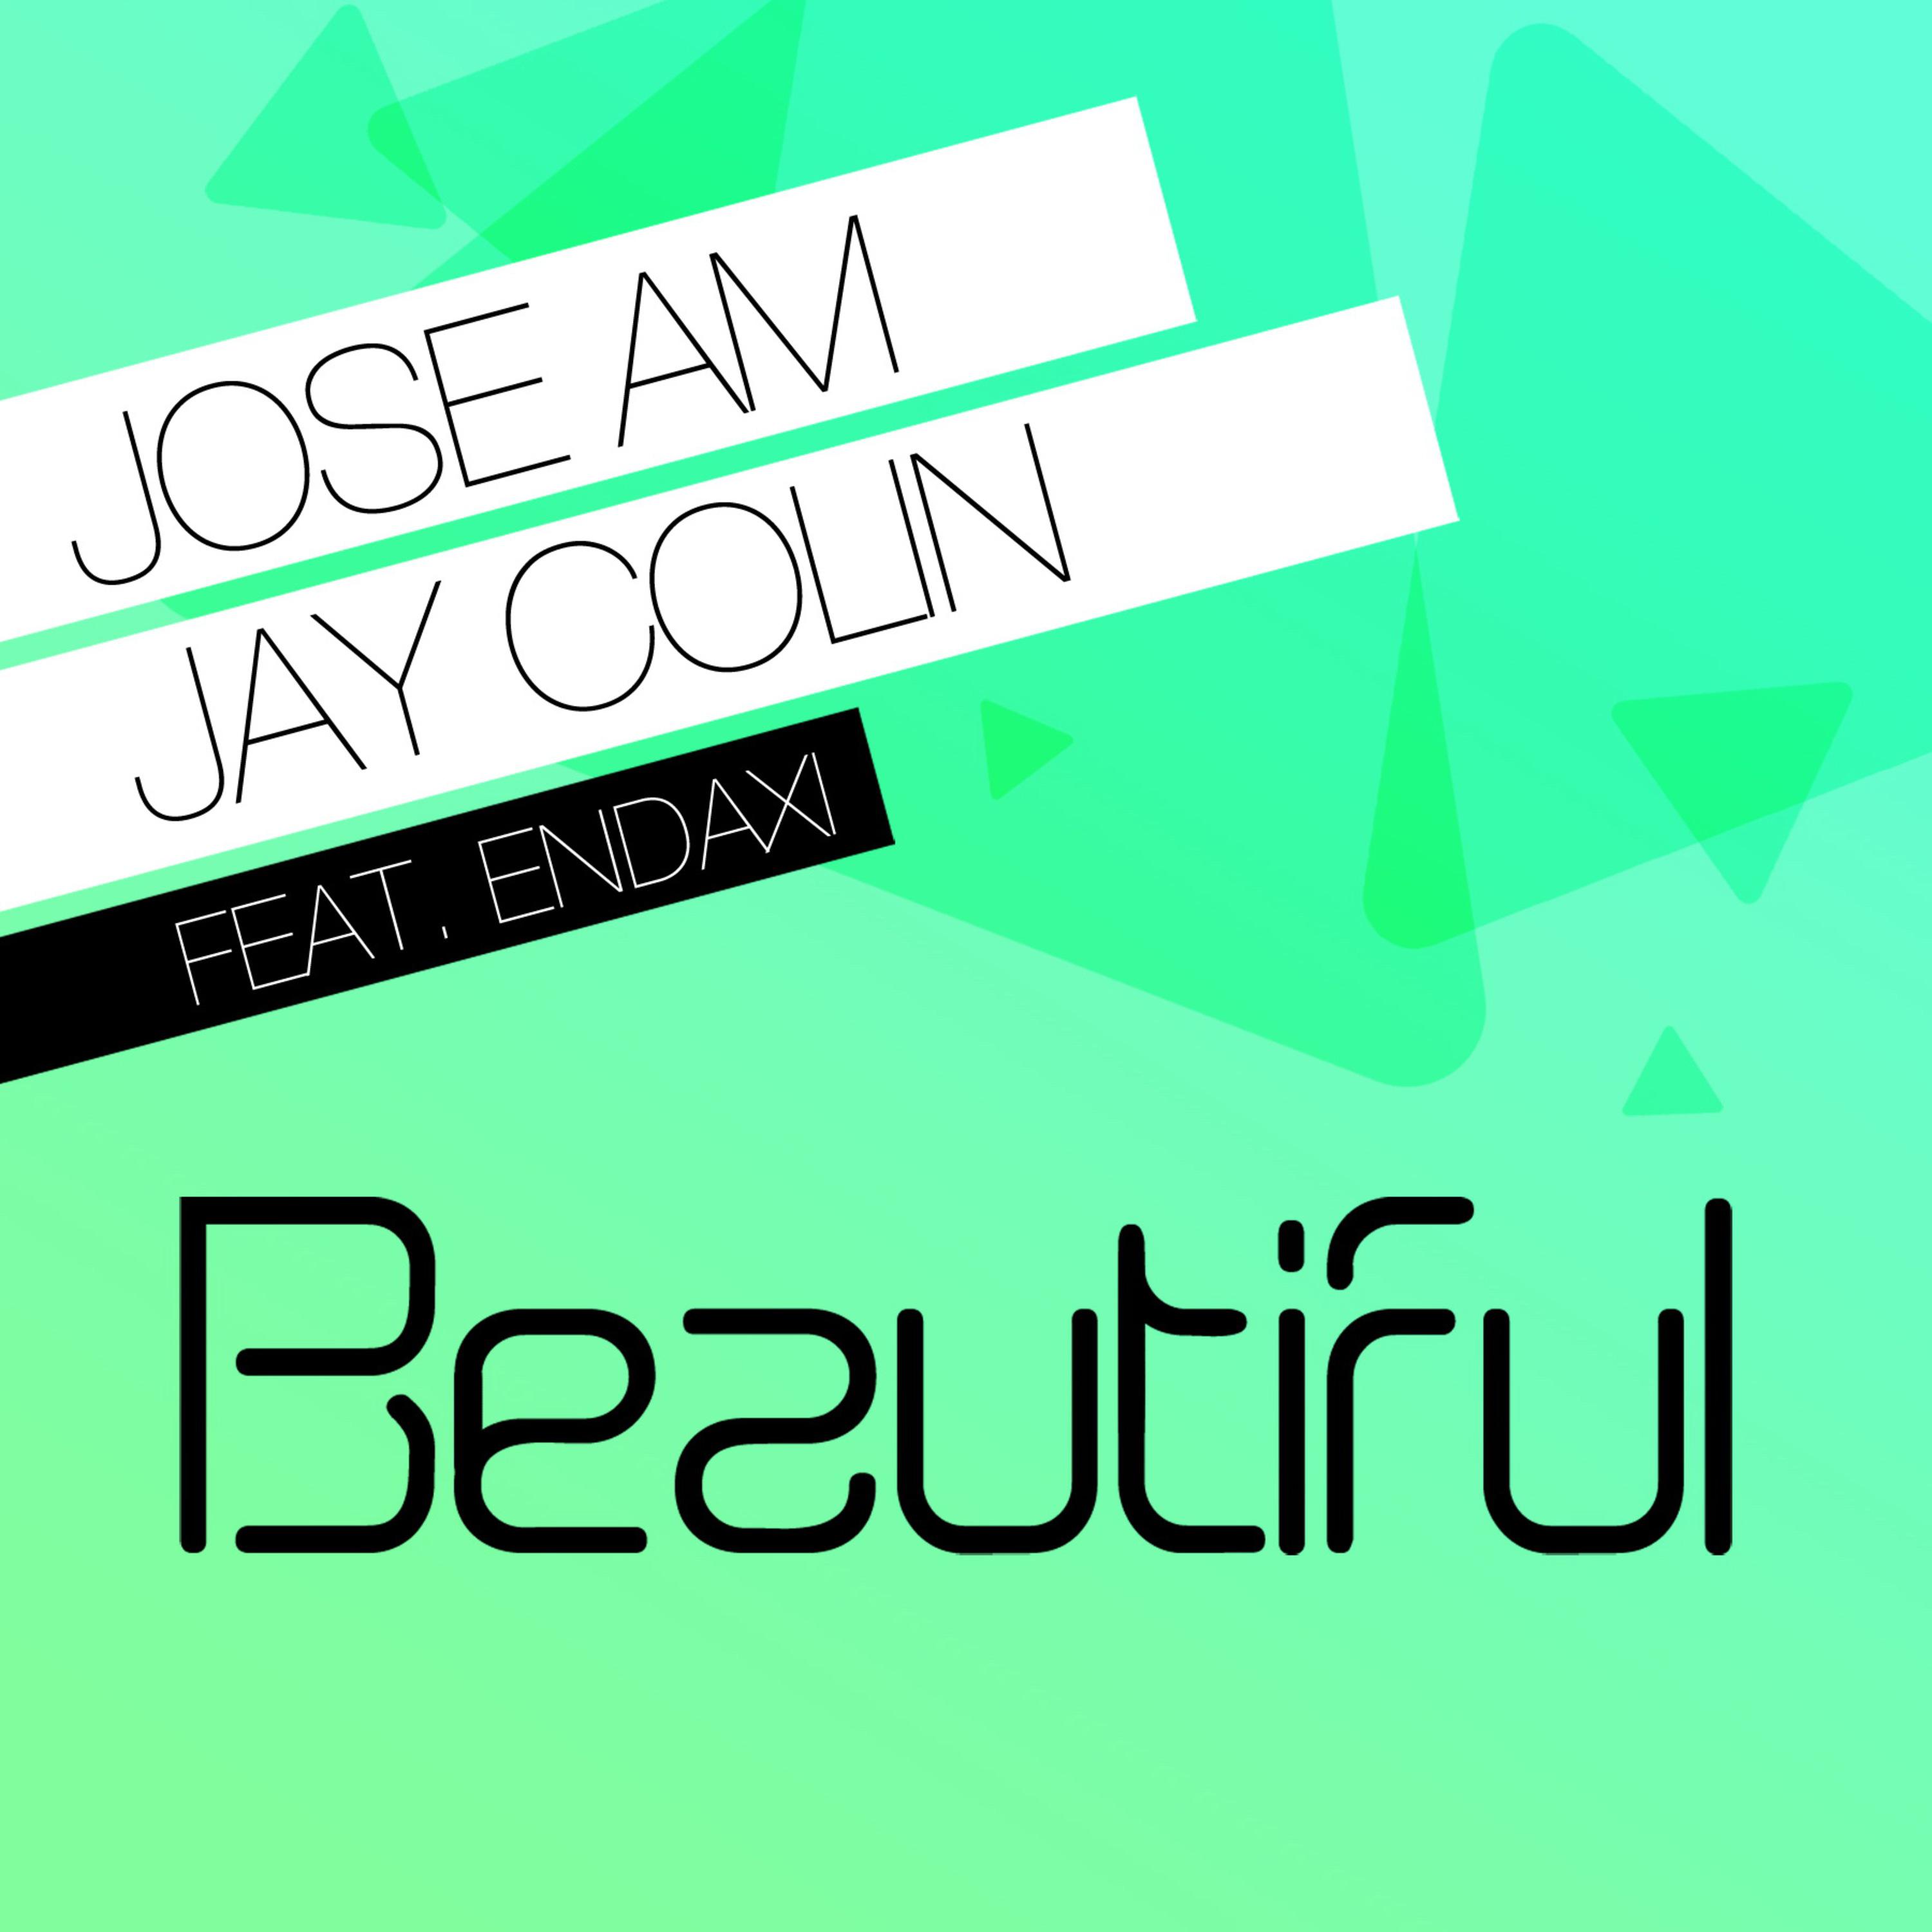 Beautiful (Extended Mix)